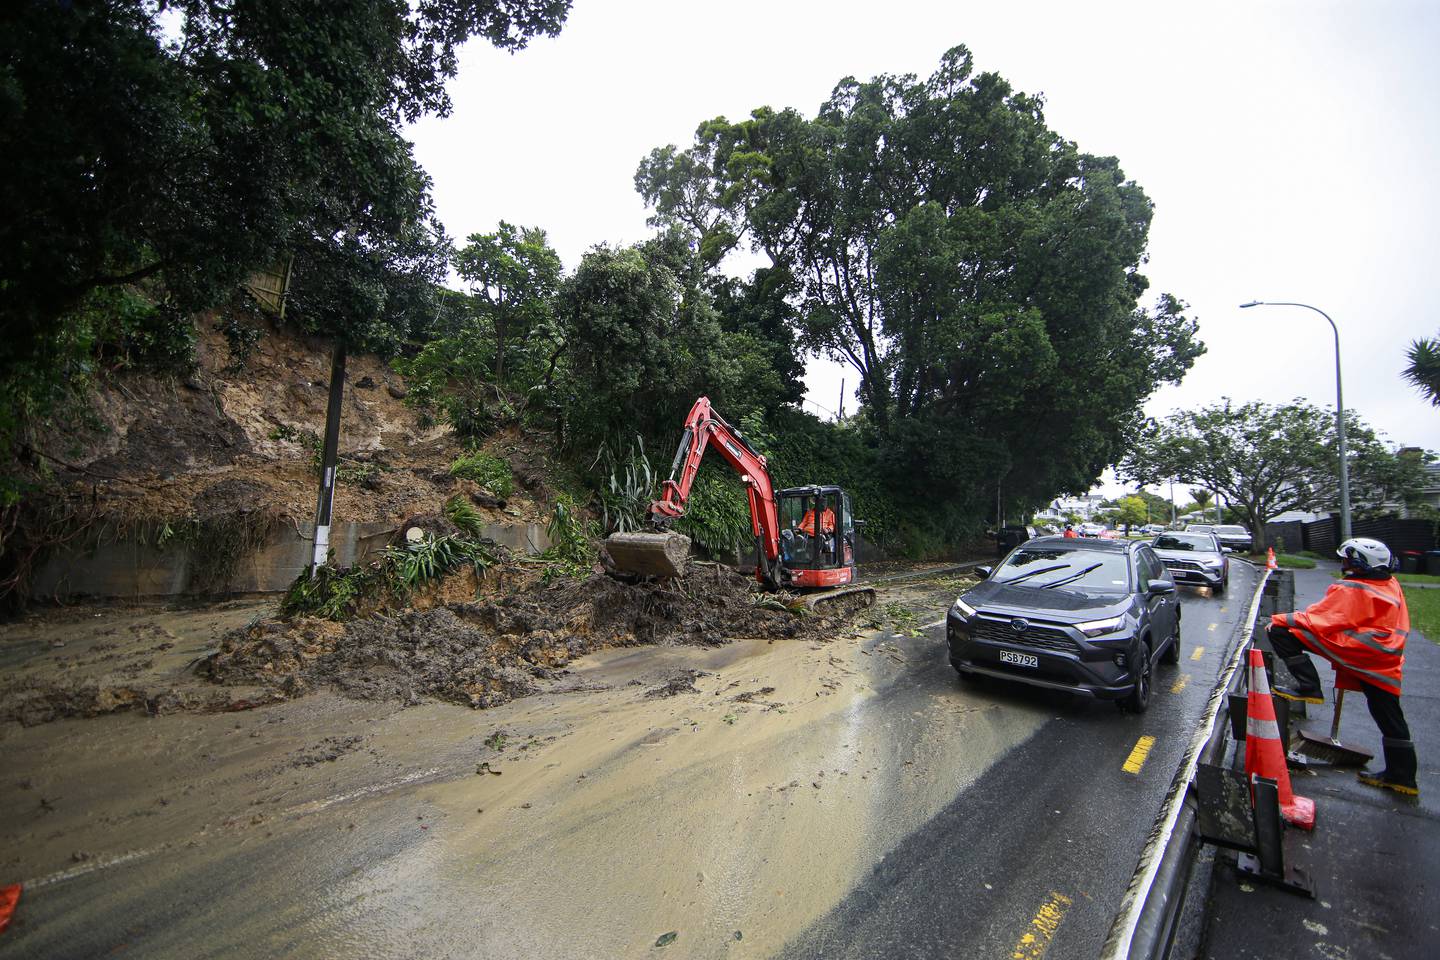 Workers clean up a slip on West End Rd in Herne Bay after storms and flooding in Auckland. Photo / Alex Burton